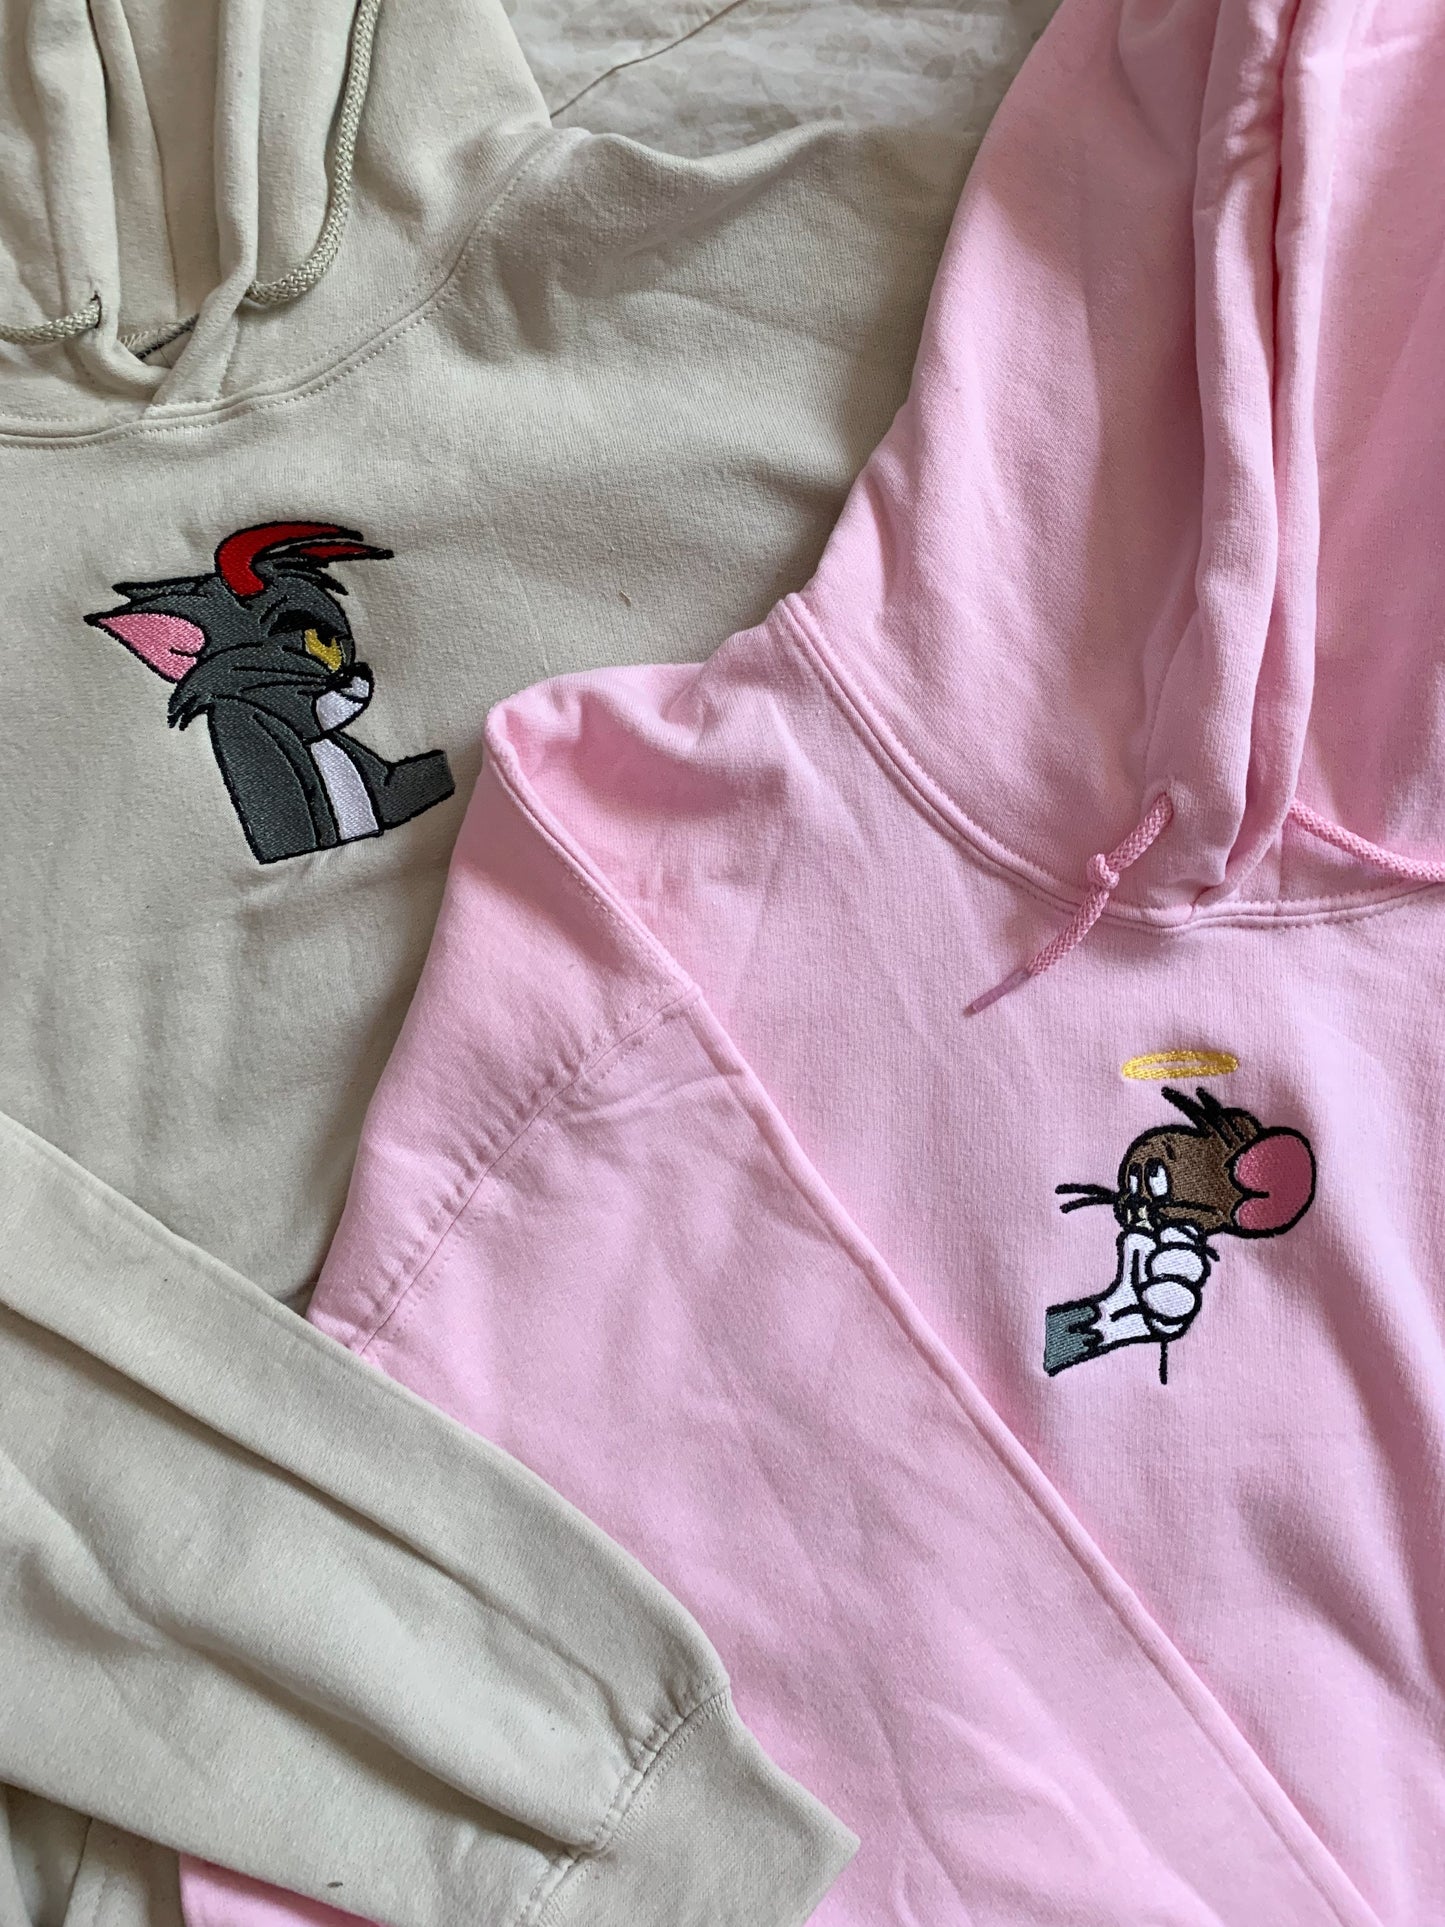 Tom and Jerry Matching Embroidered Set